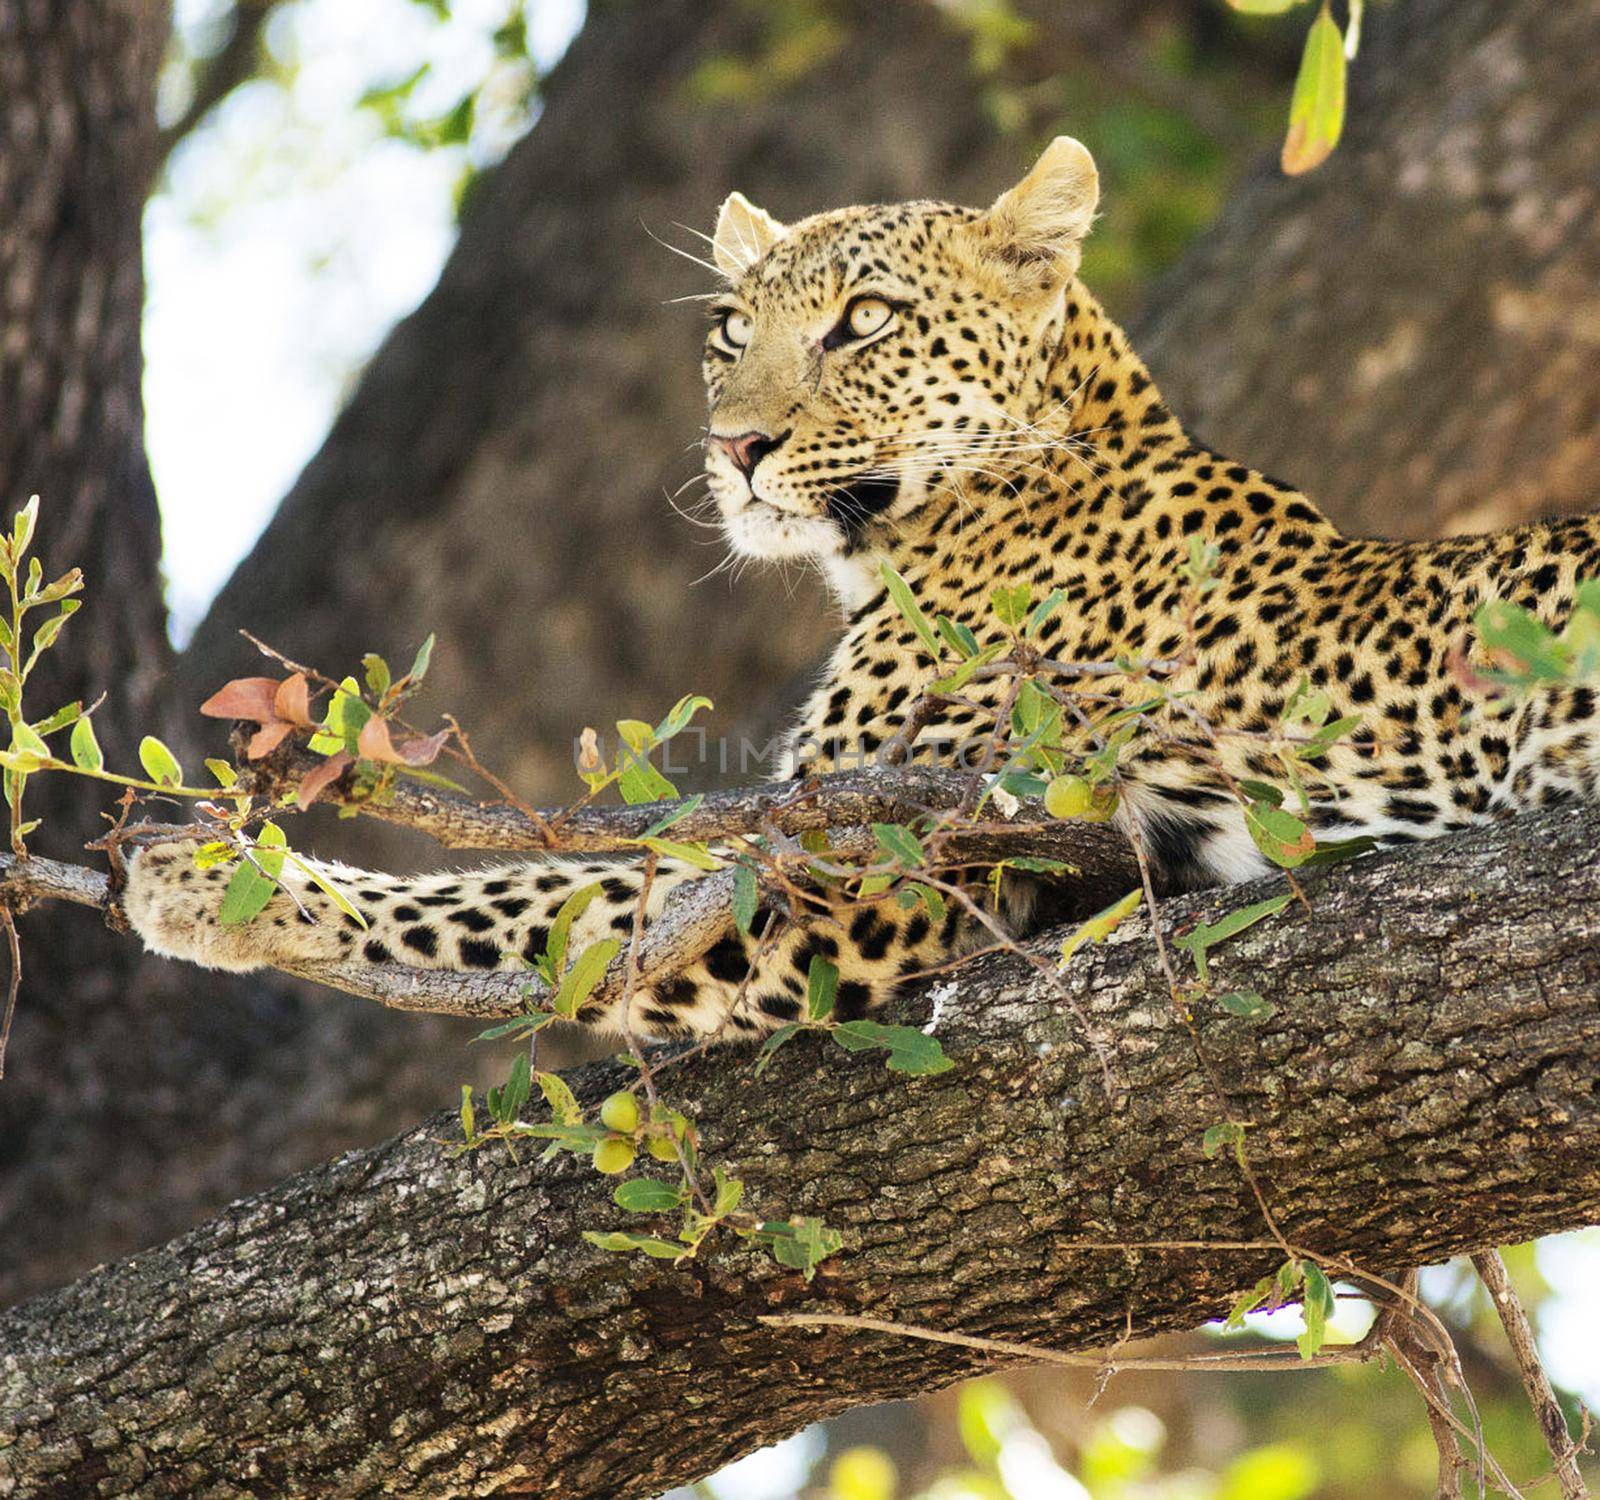 Creative Wildlife pictures of  Moremi, Botswana by TravelSync27